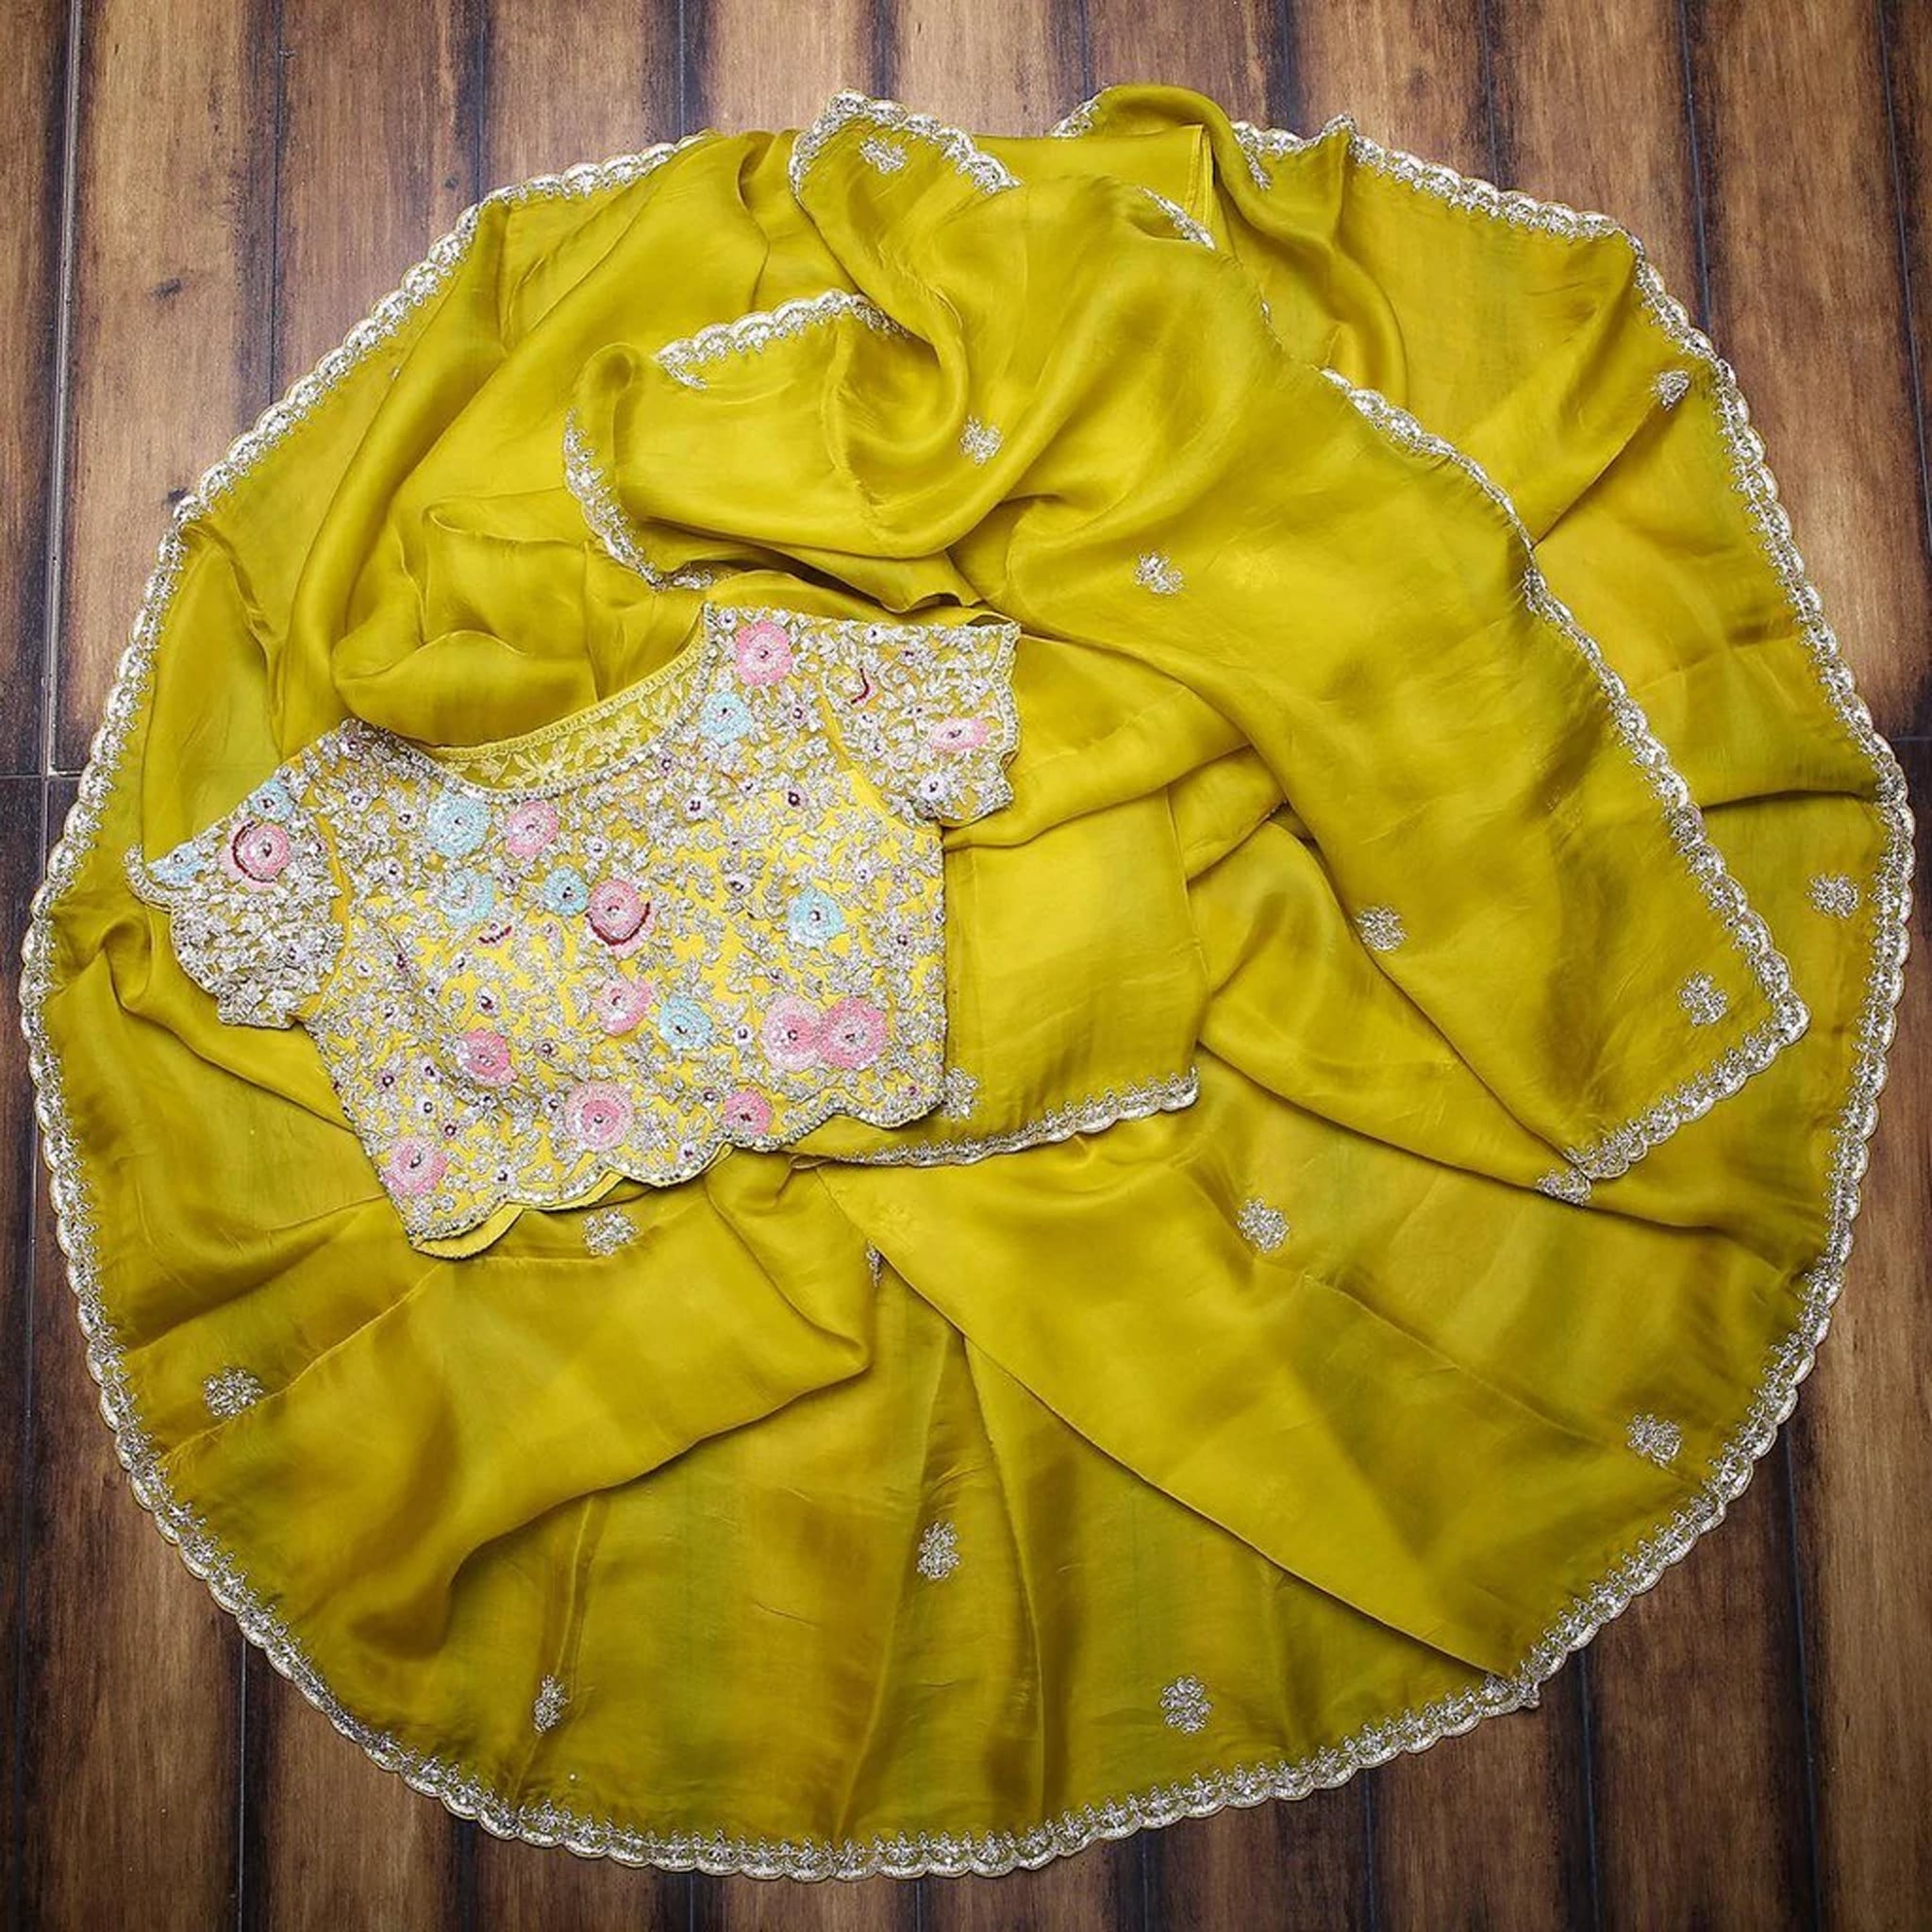 Yellow Organza Saree with Heavy Embroidery work and Unstitched Blouse - Colorful Saree